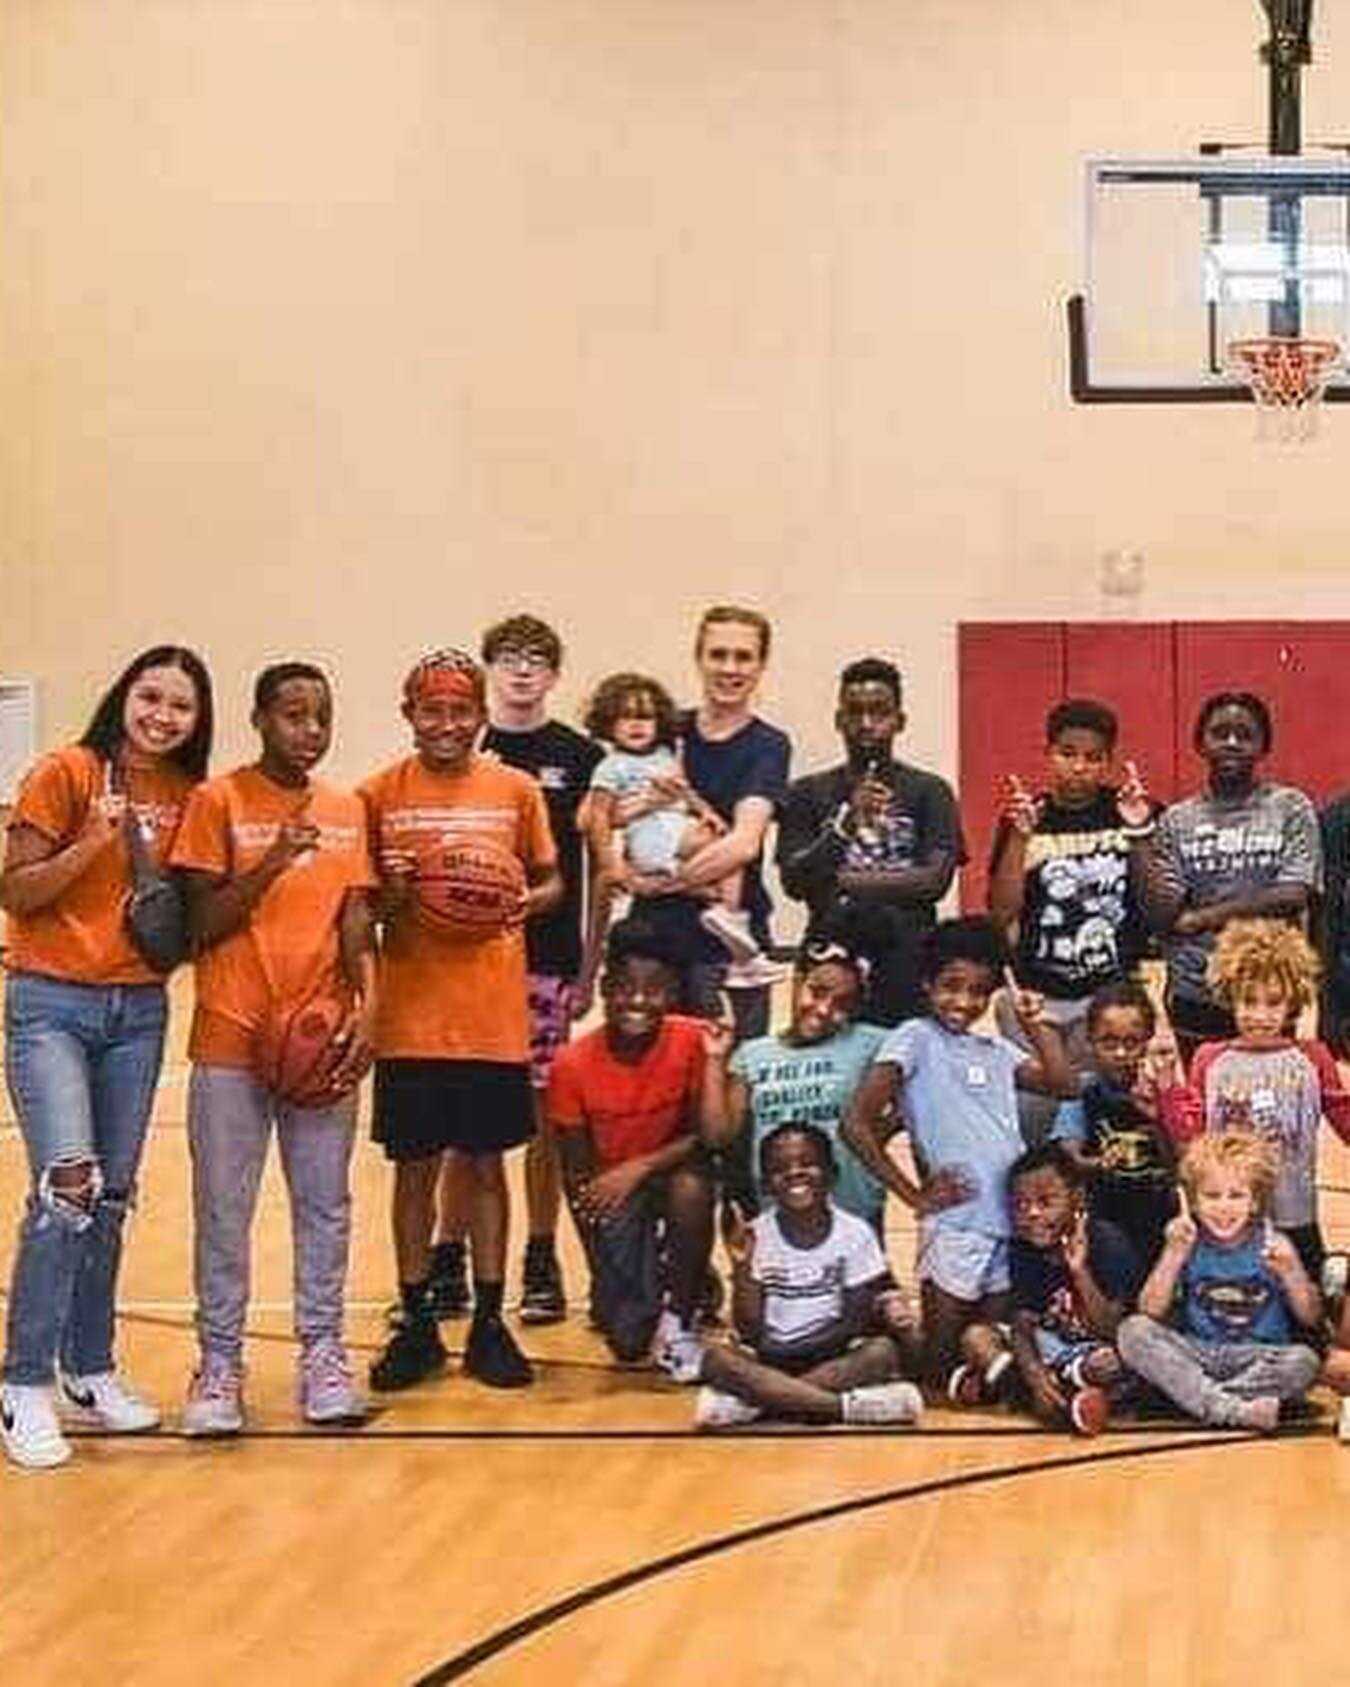 Let&rsquo;s take a walk down memory lane from our Summer Kids Club. We&rsquo;re shouting out A BIG thank you to @jaydenoliverbasketball and coaches for volunteering their time to put on a FREE basketball clinic for our campers! Students learned new s